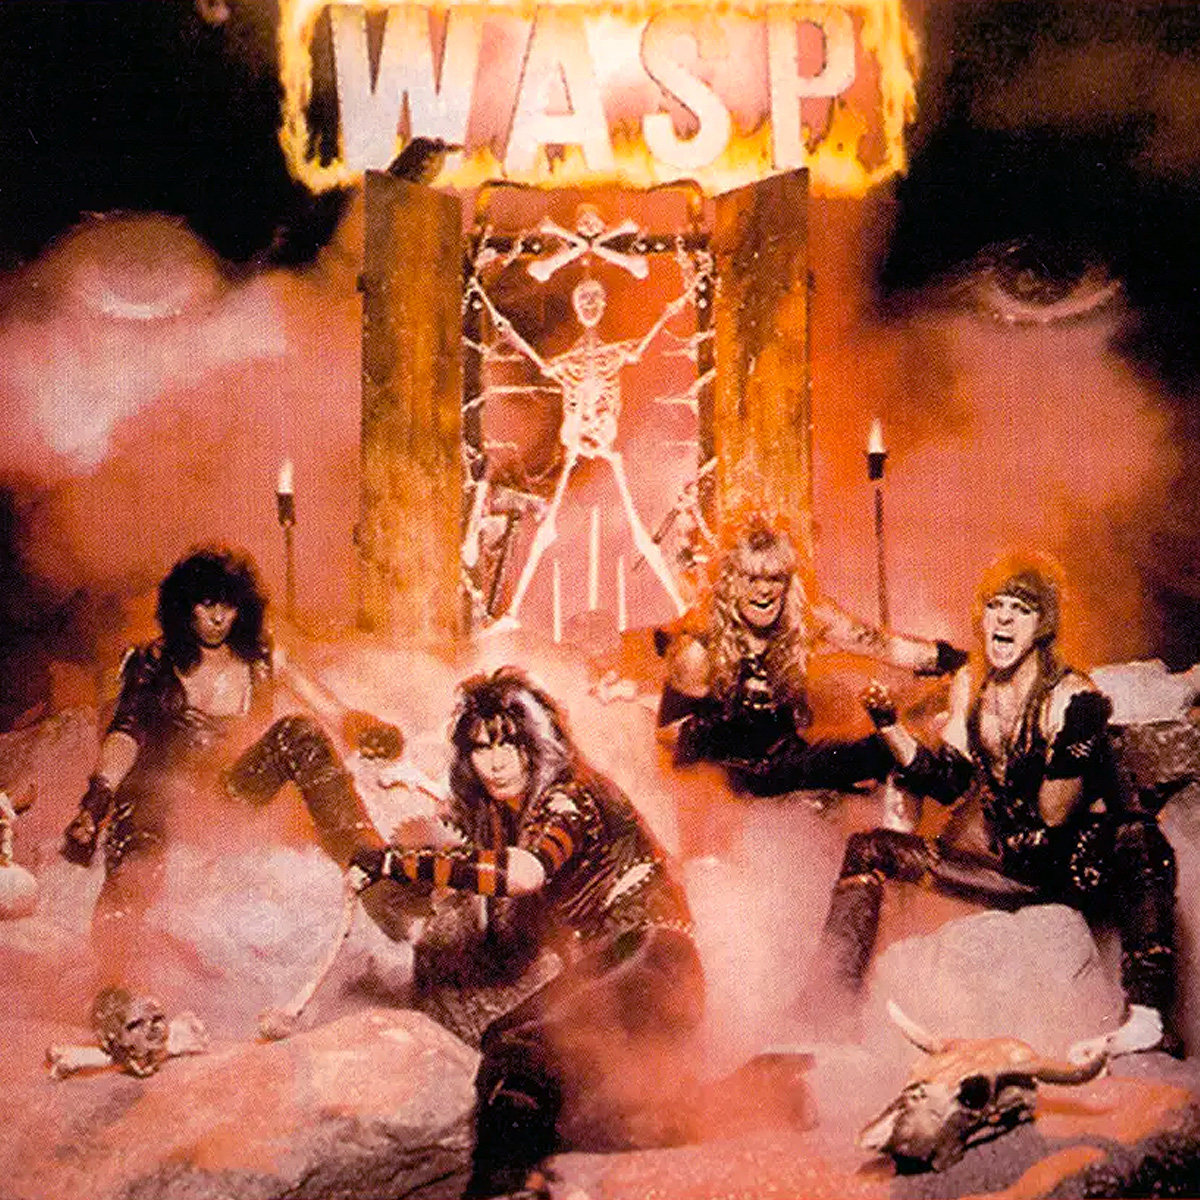 W.A.S.P. cd cover